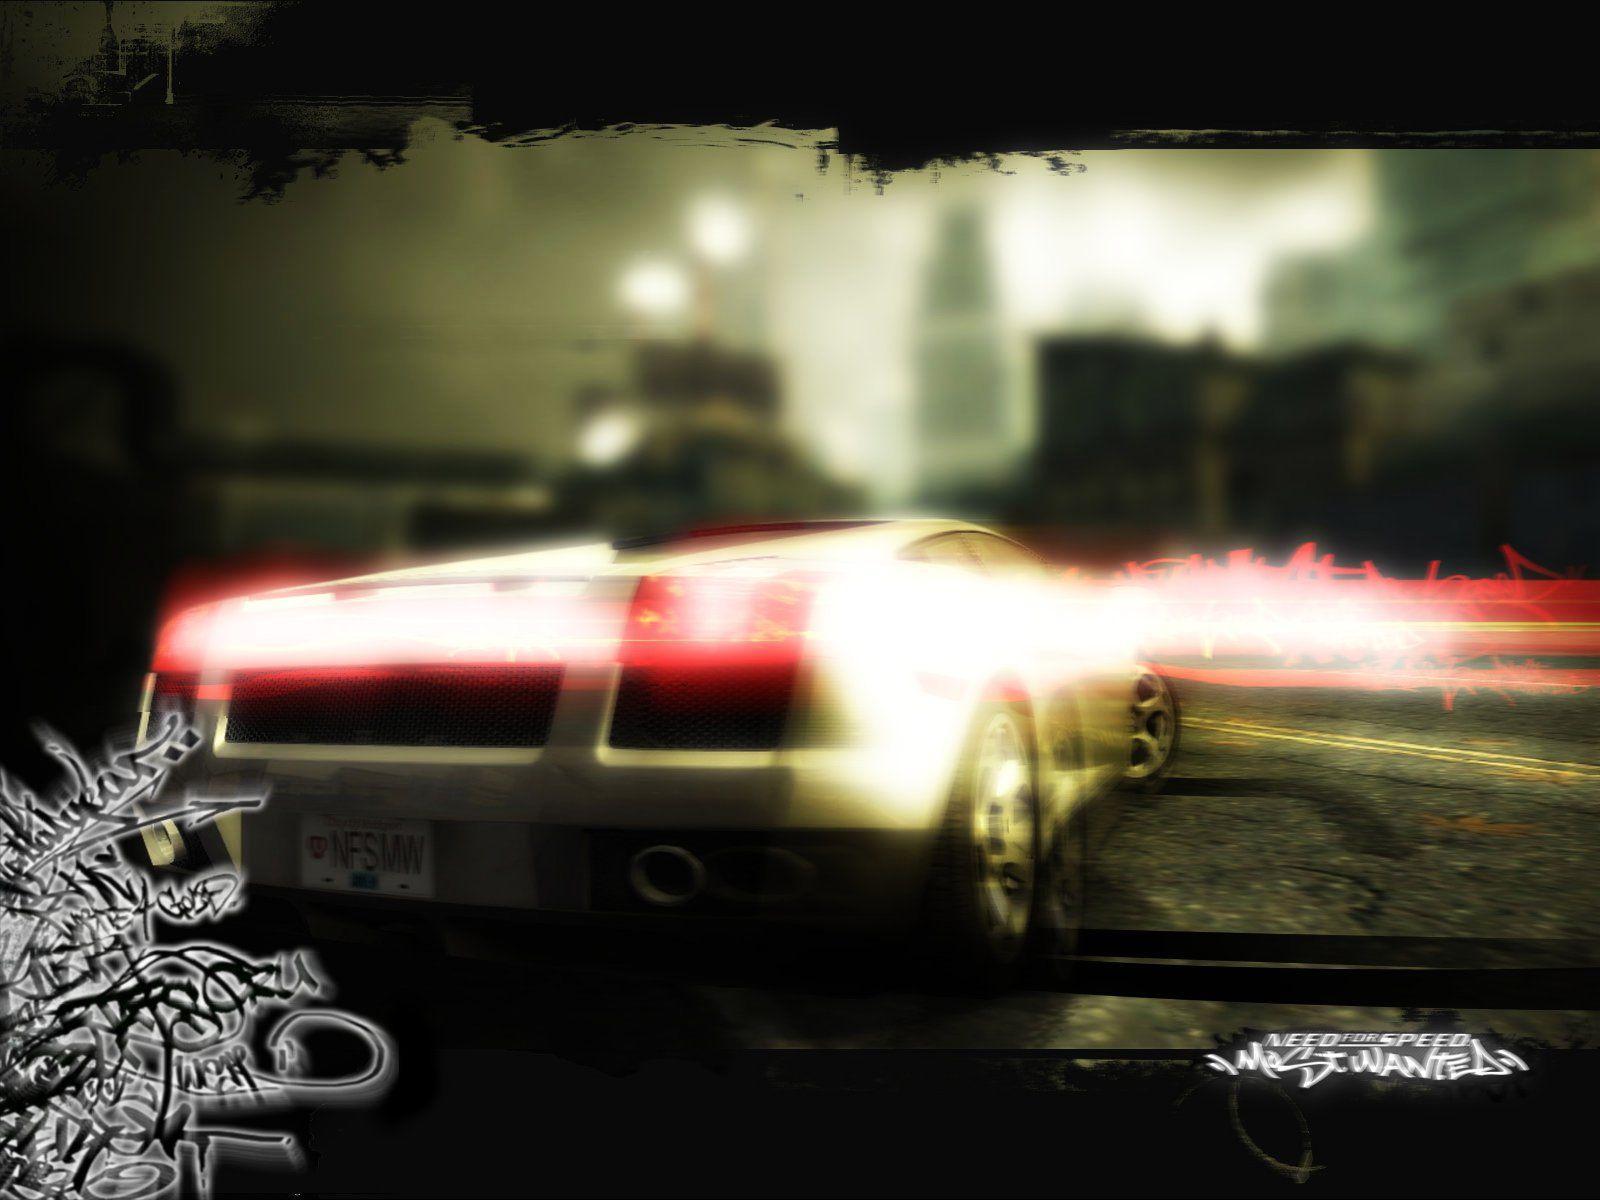 Nfs Most Wanted Wallpaper